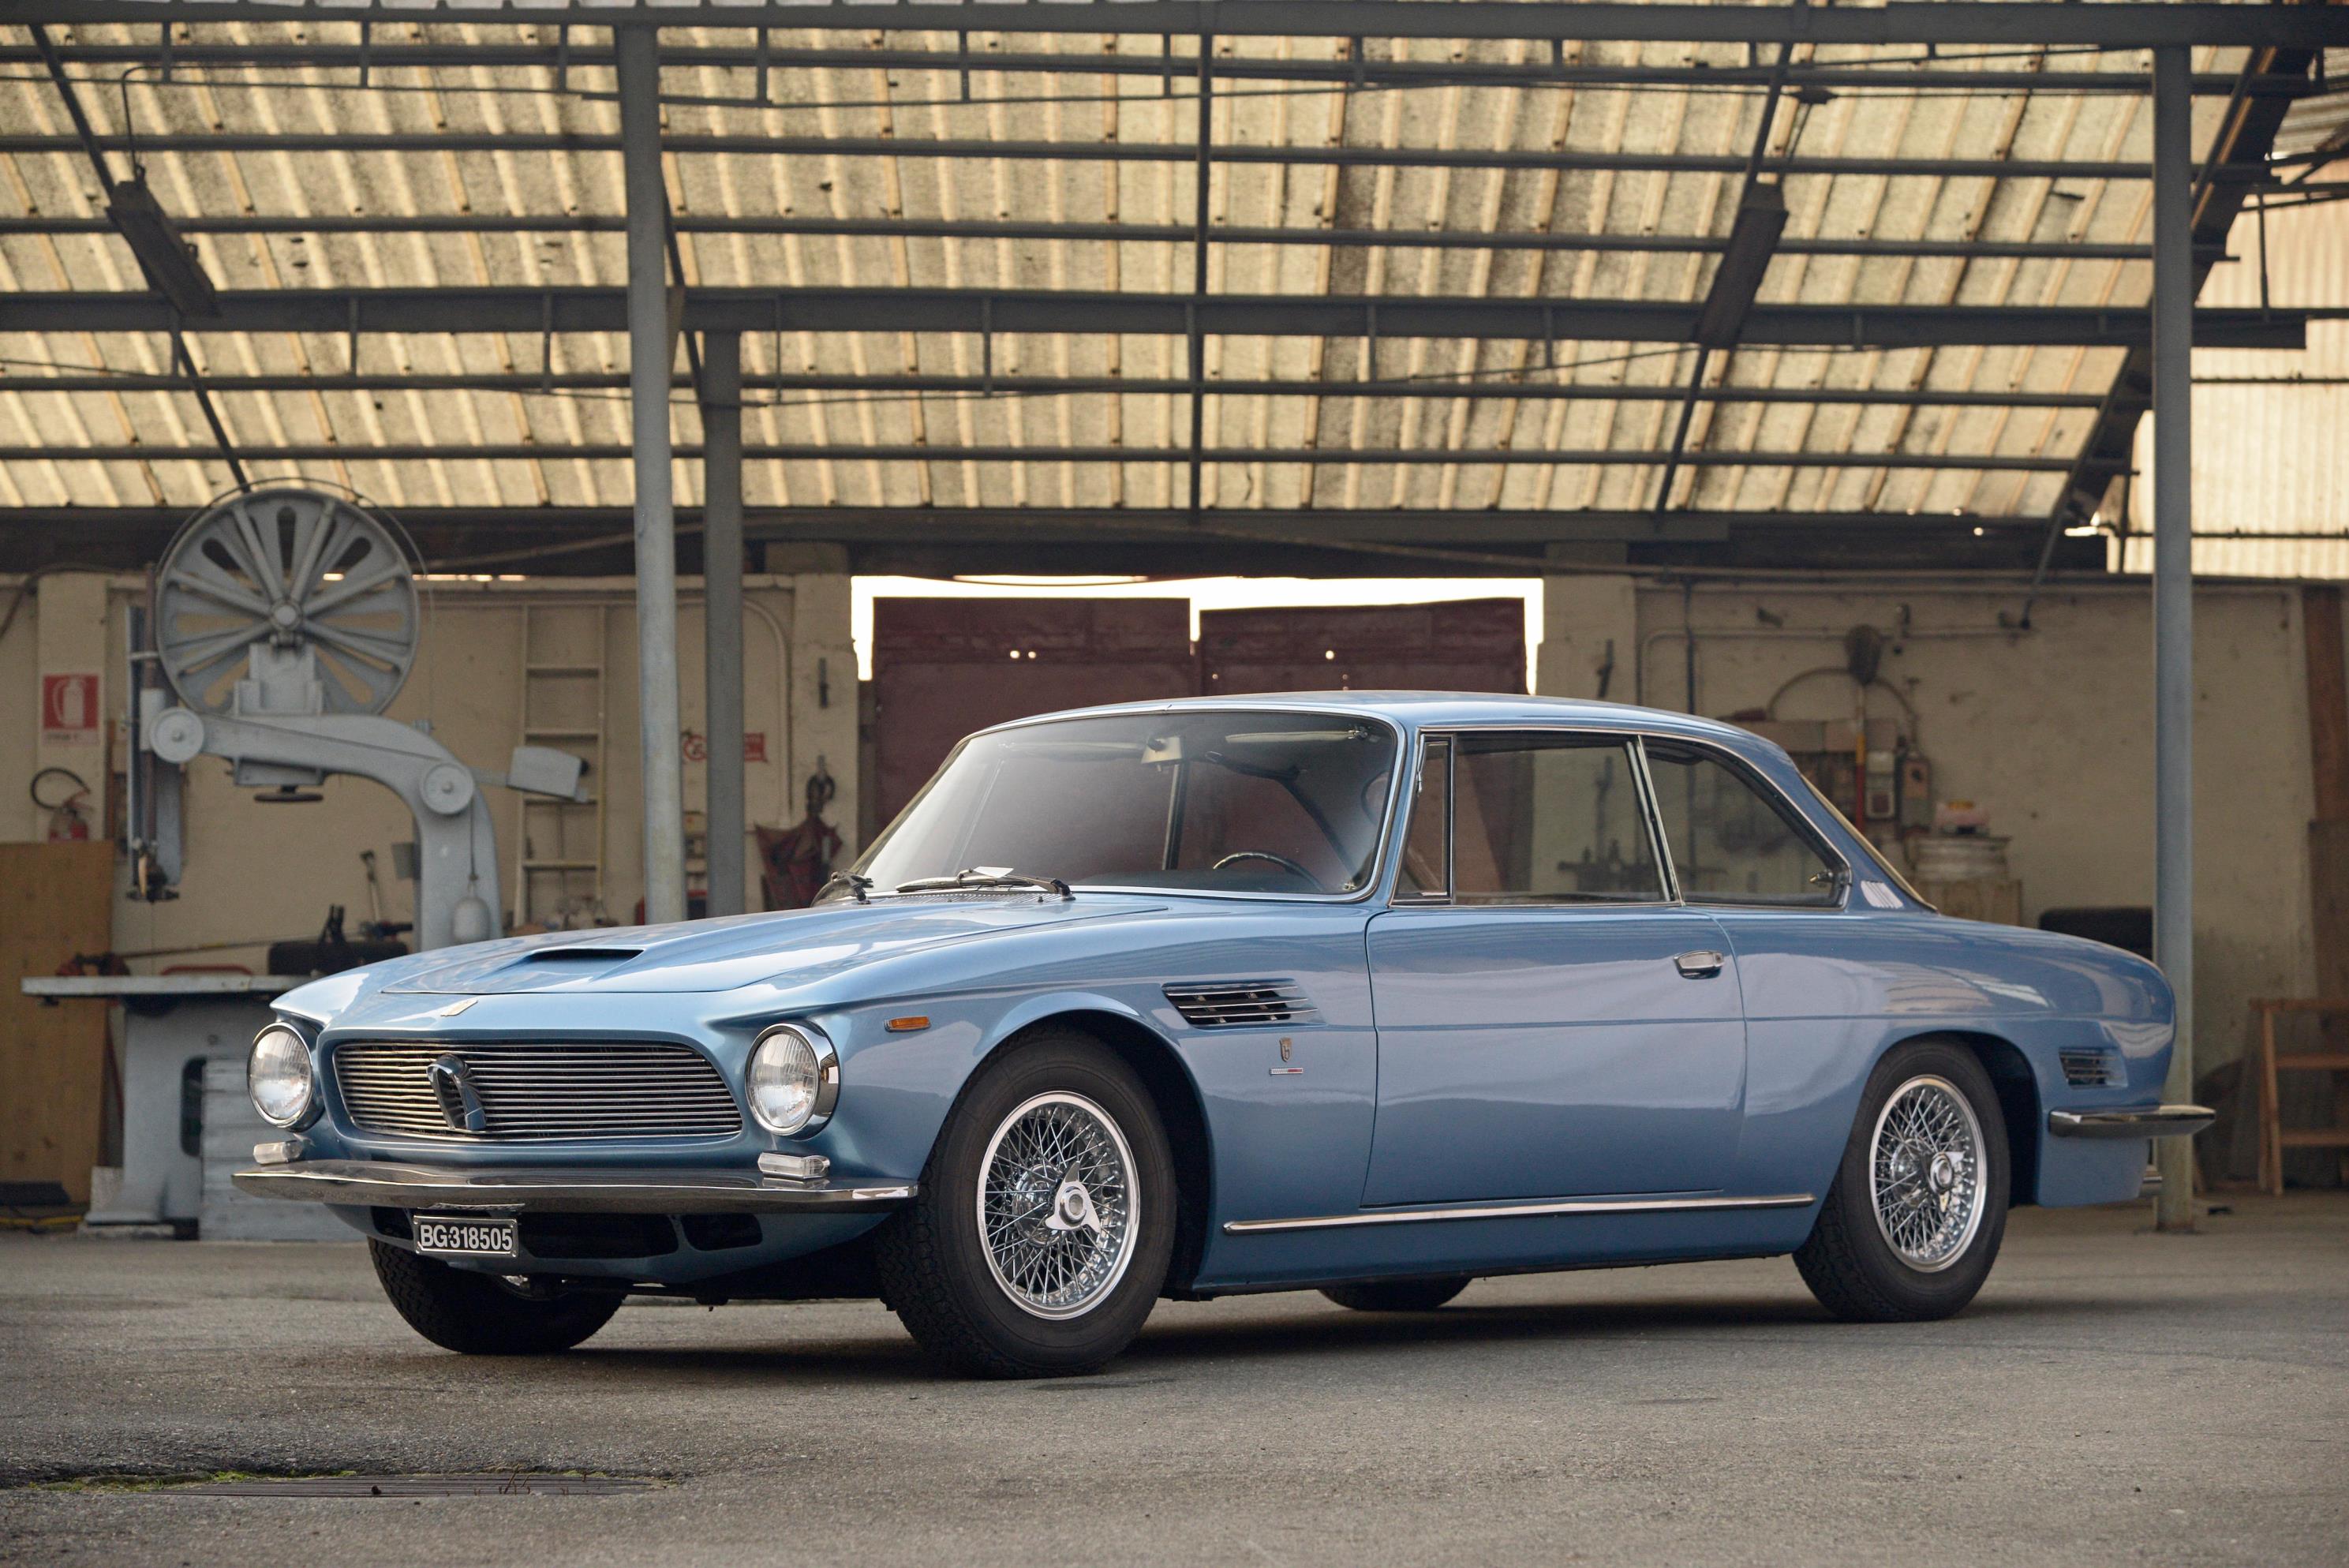 The ISO Rivolta name is back